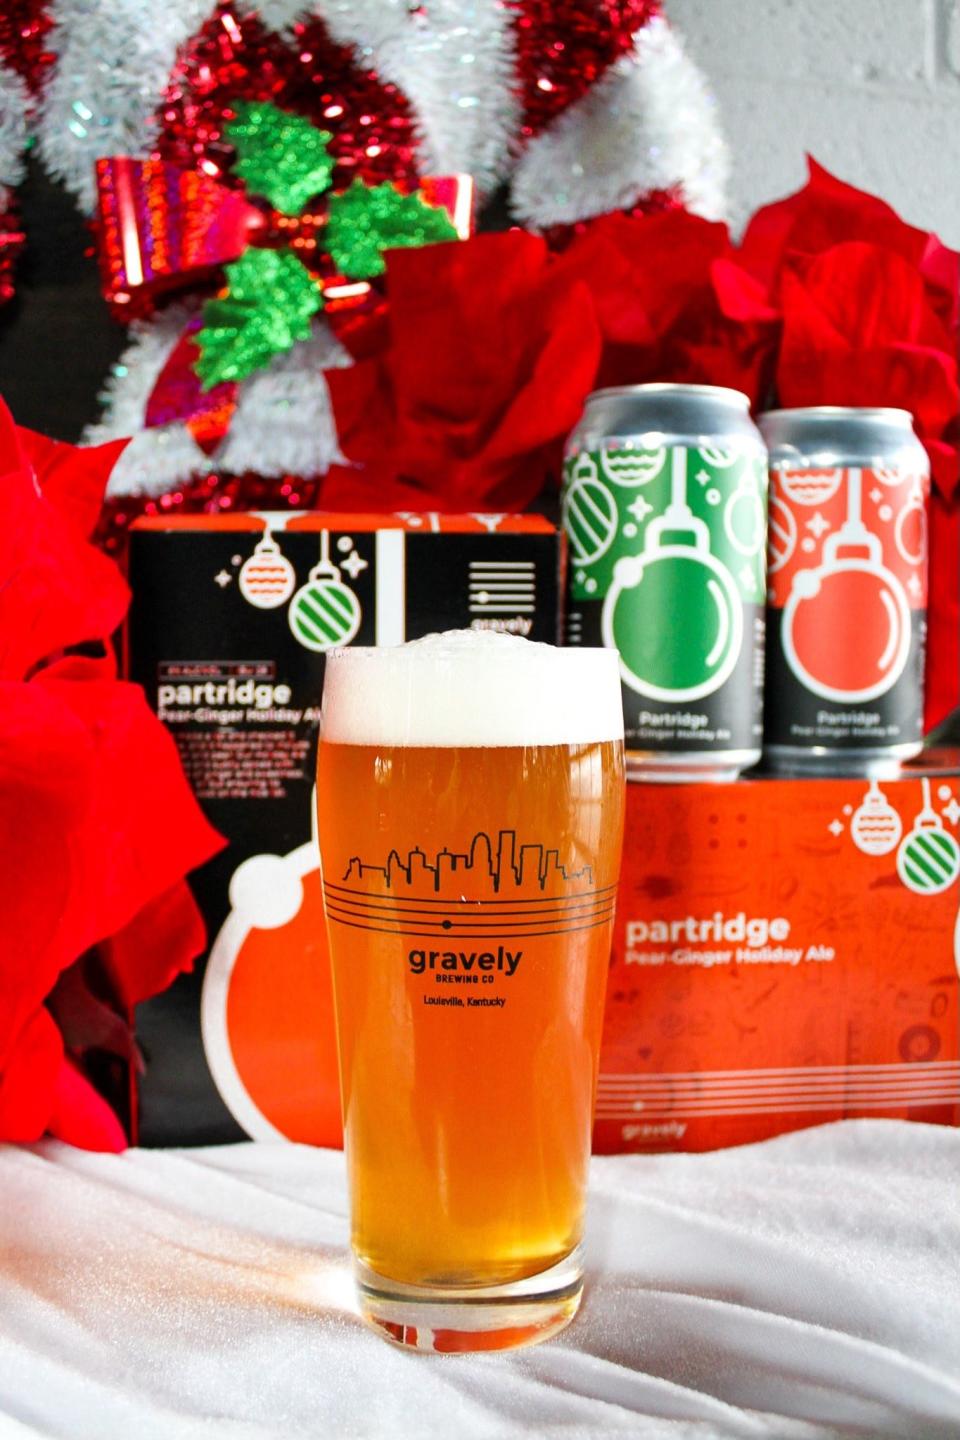 Partridge, a holiday ale at Gravely Brewing Co, is a copper colored ale with mellow caramel sweetness paired with candied pears and spiced with ginger root before a dry, refreshing finish.